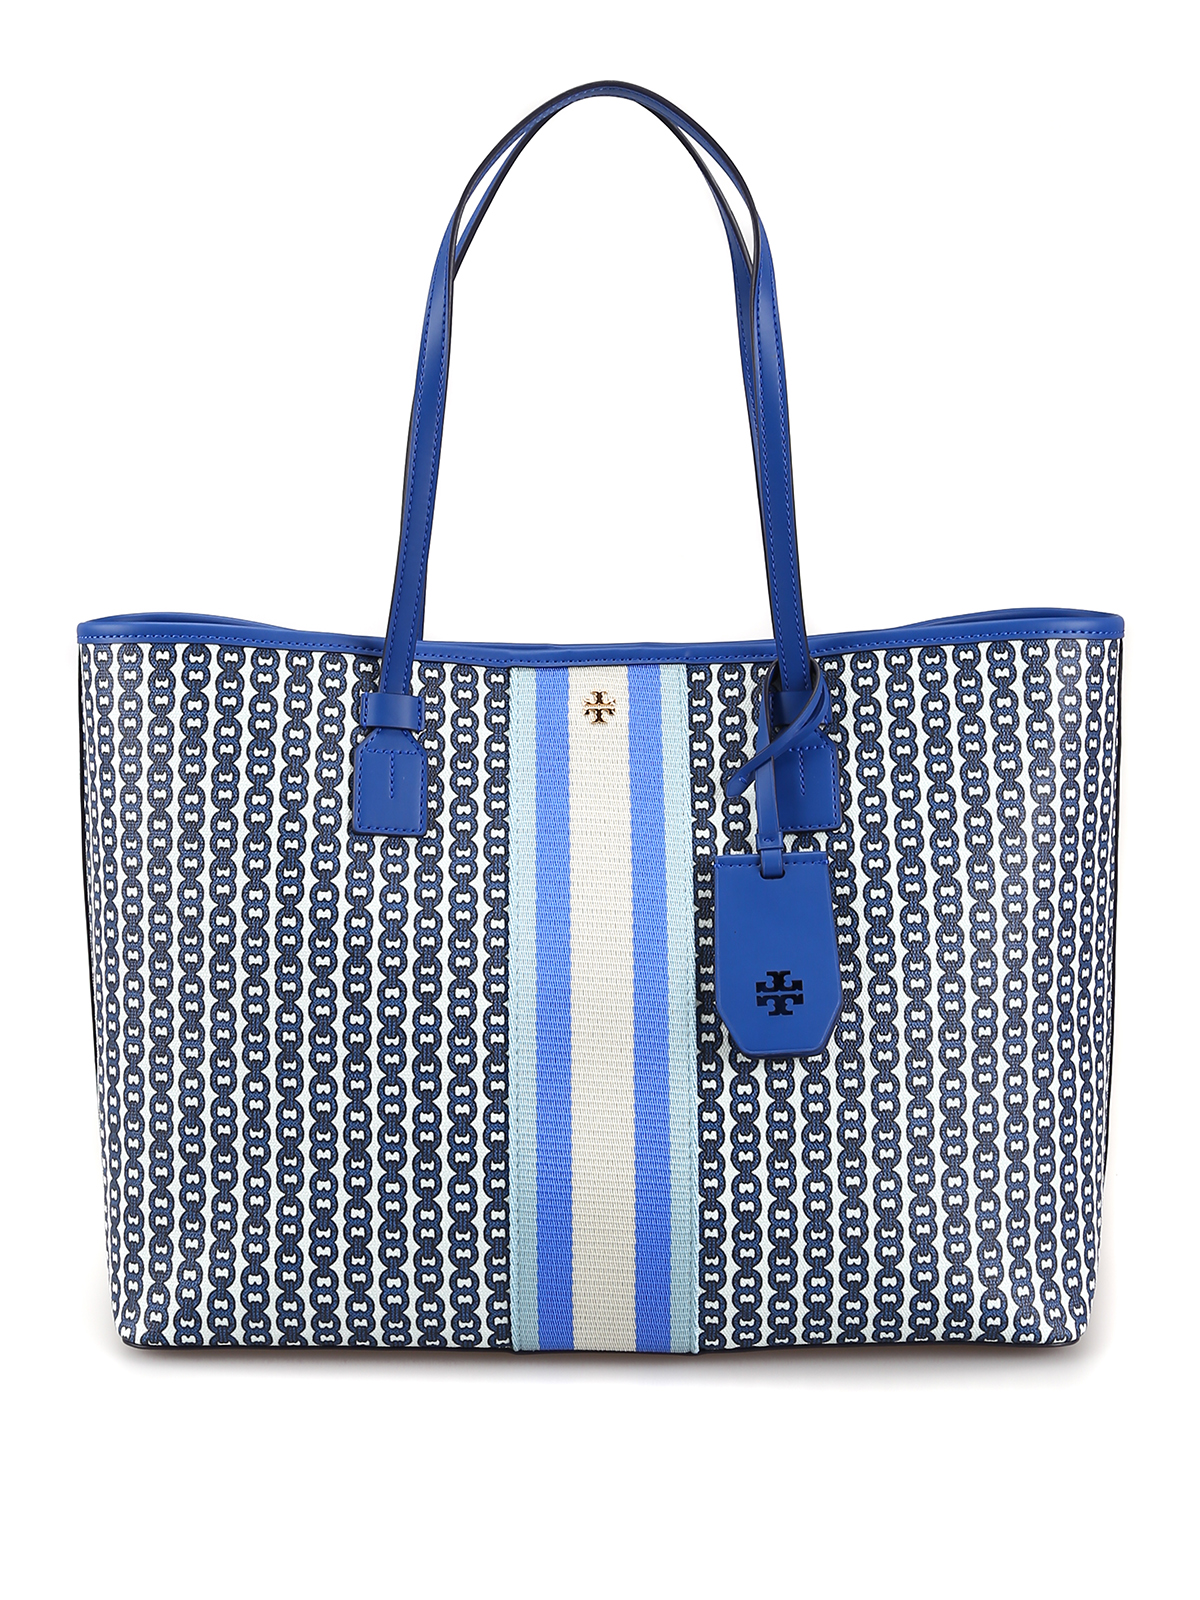 Tory Burch Gemini Link striped Canvas Tote large bag. Blue/white with  organizer